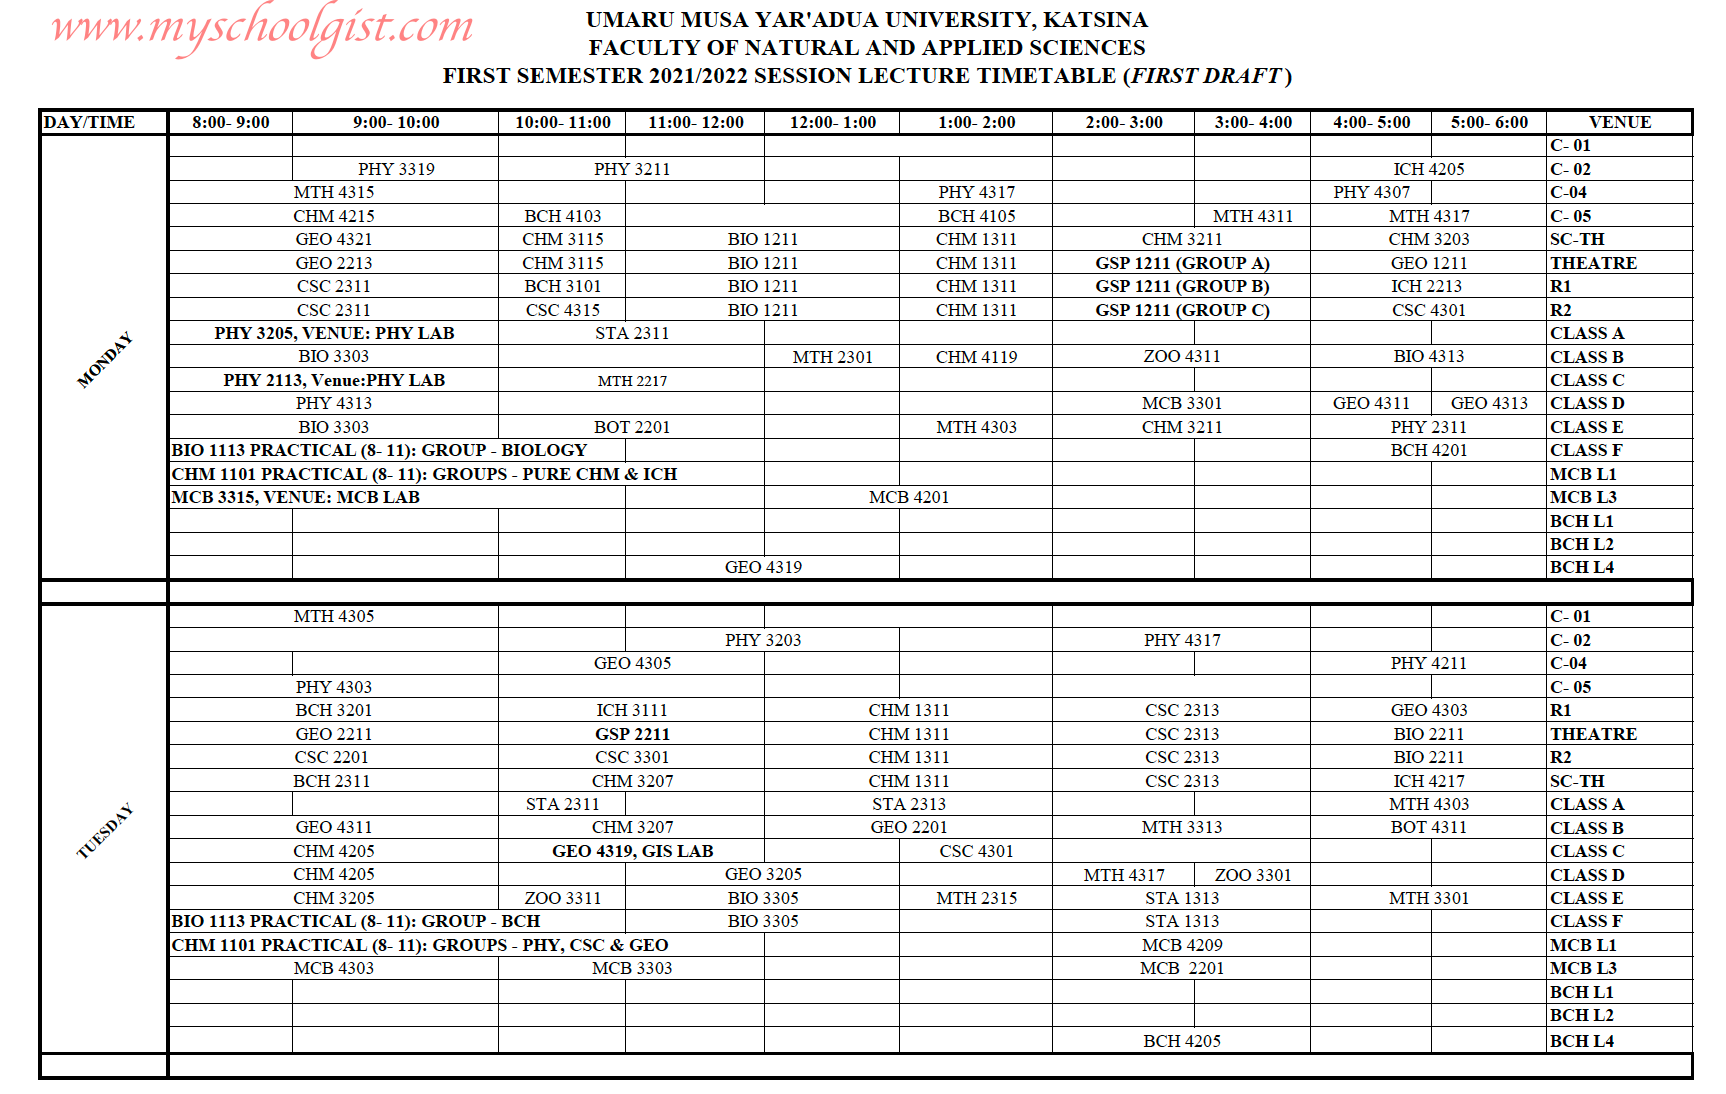 UMYU Lecture Timetable 1